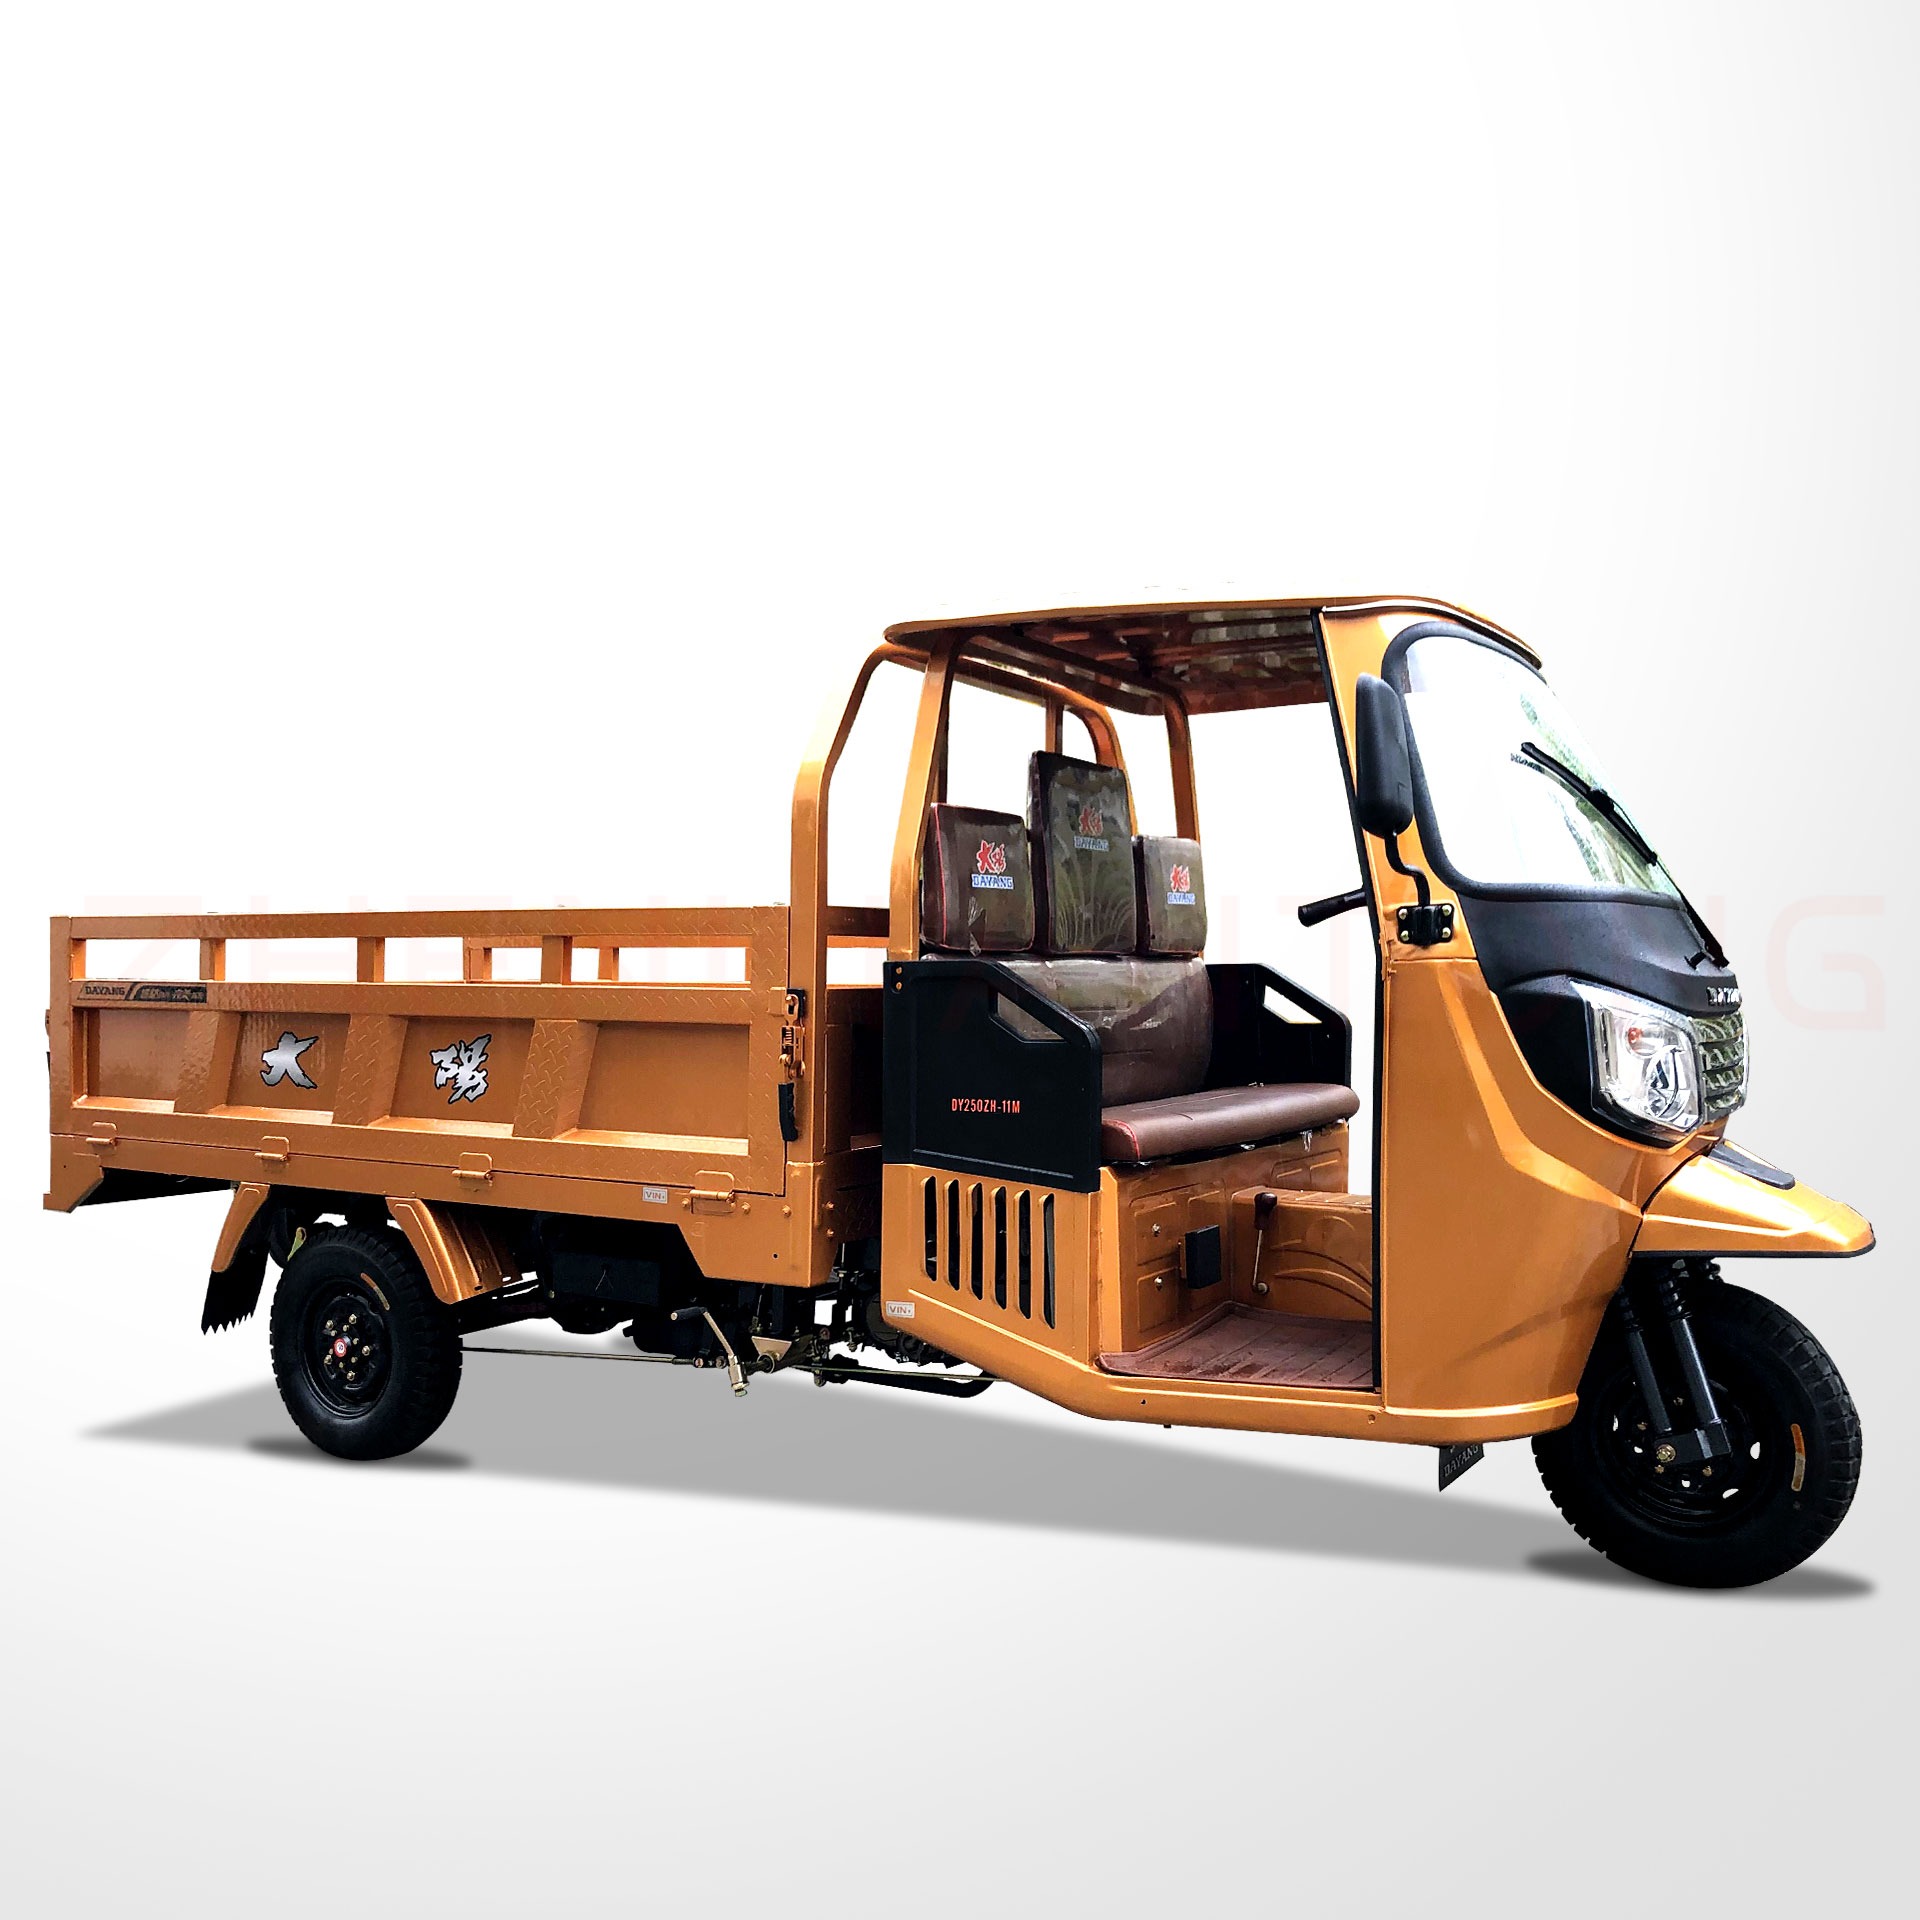 High Quality Heavy Duty Motorized Cargo Cabin Motor Tricycle Customized Large Size Tricycles Price cooling mode method origin